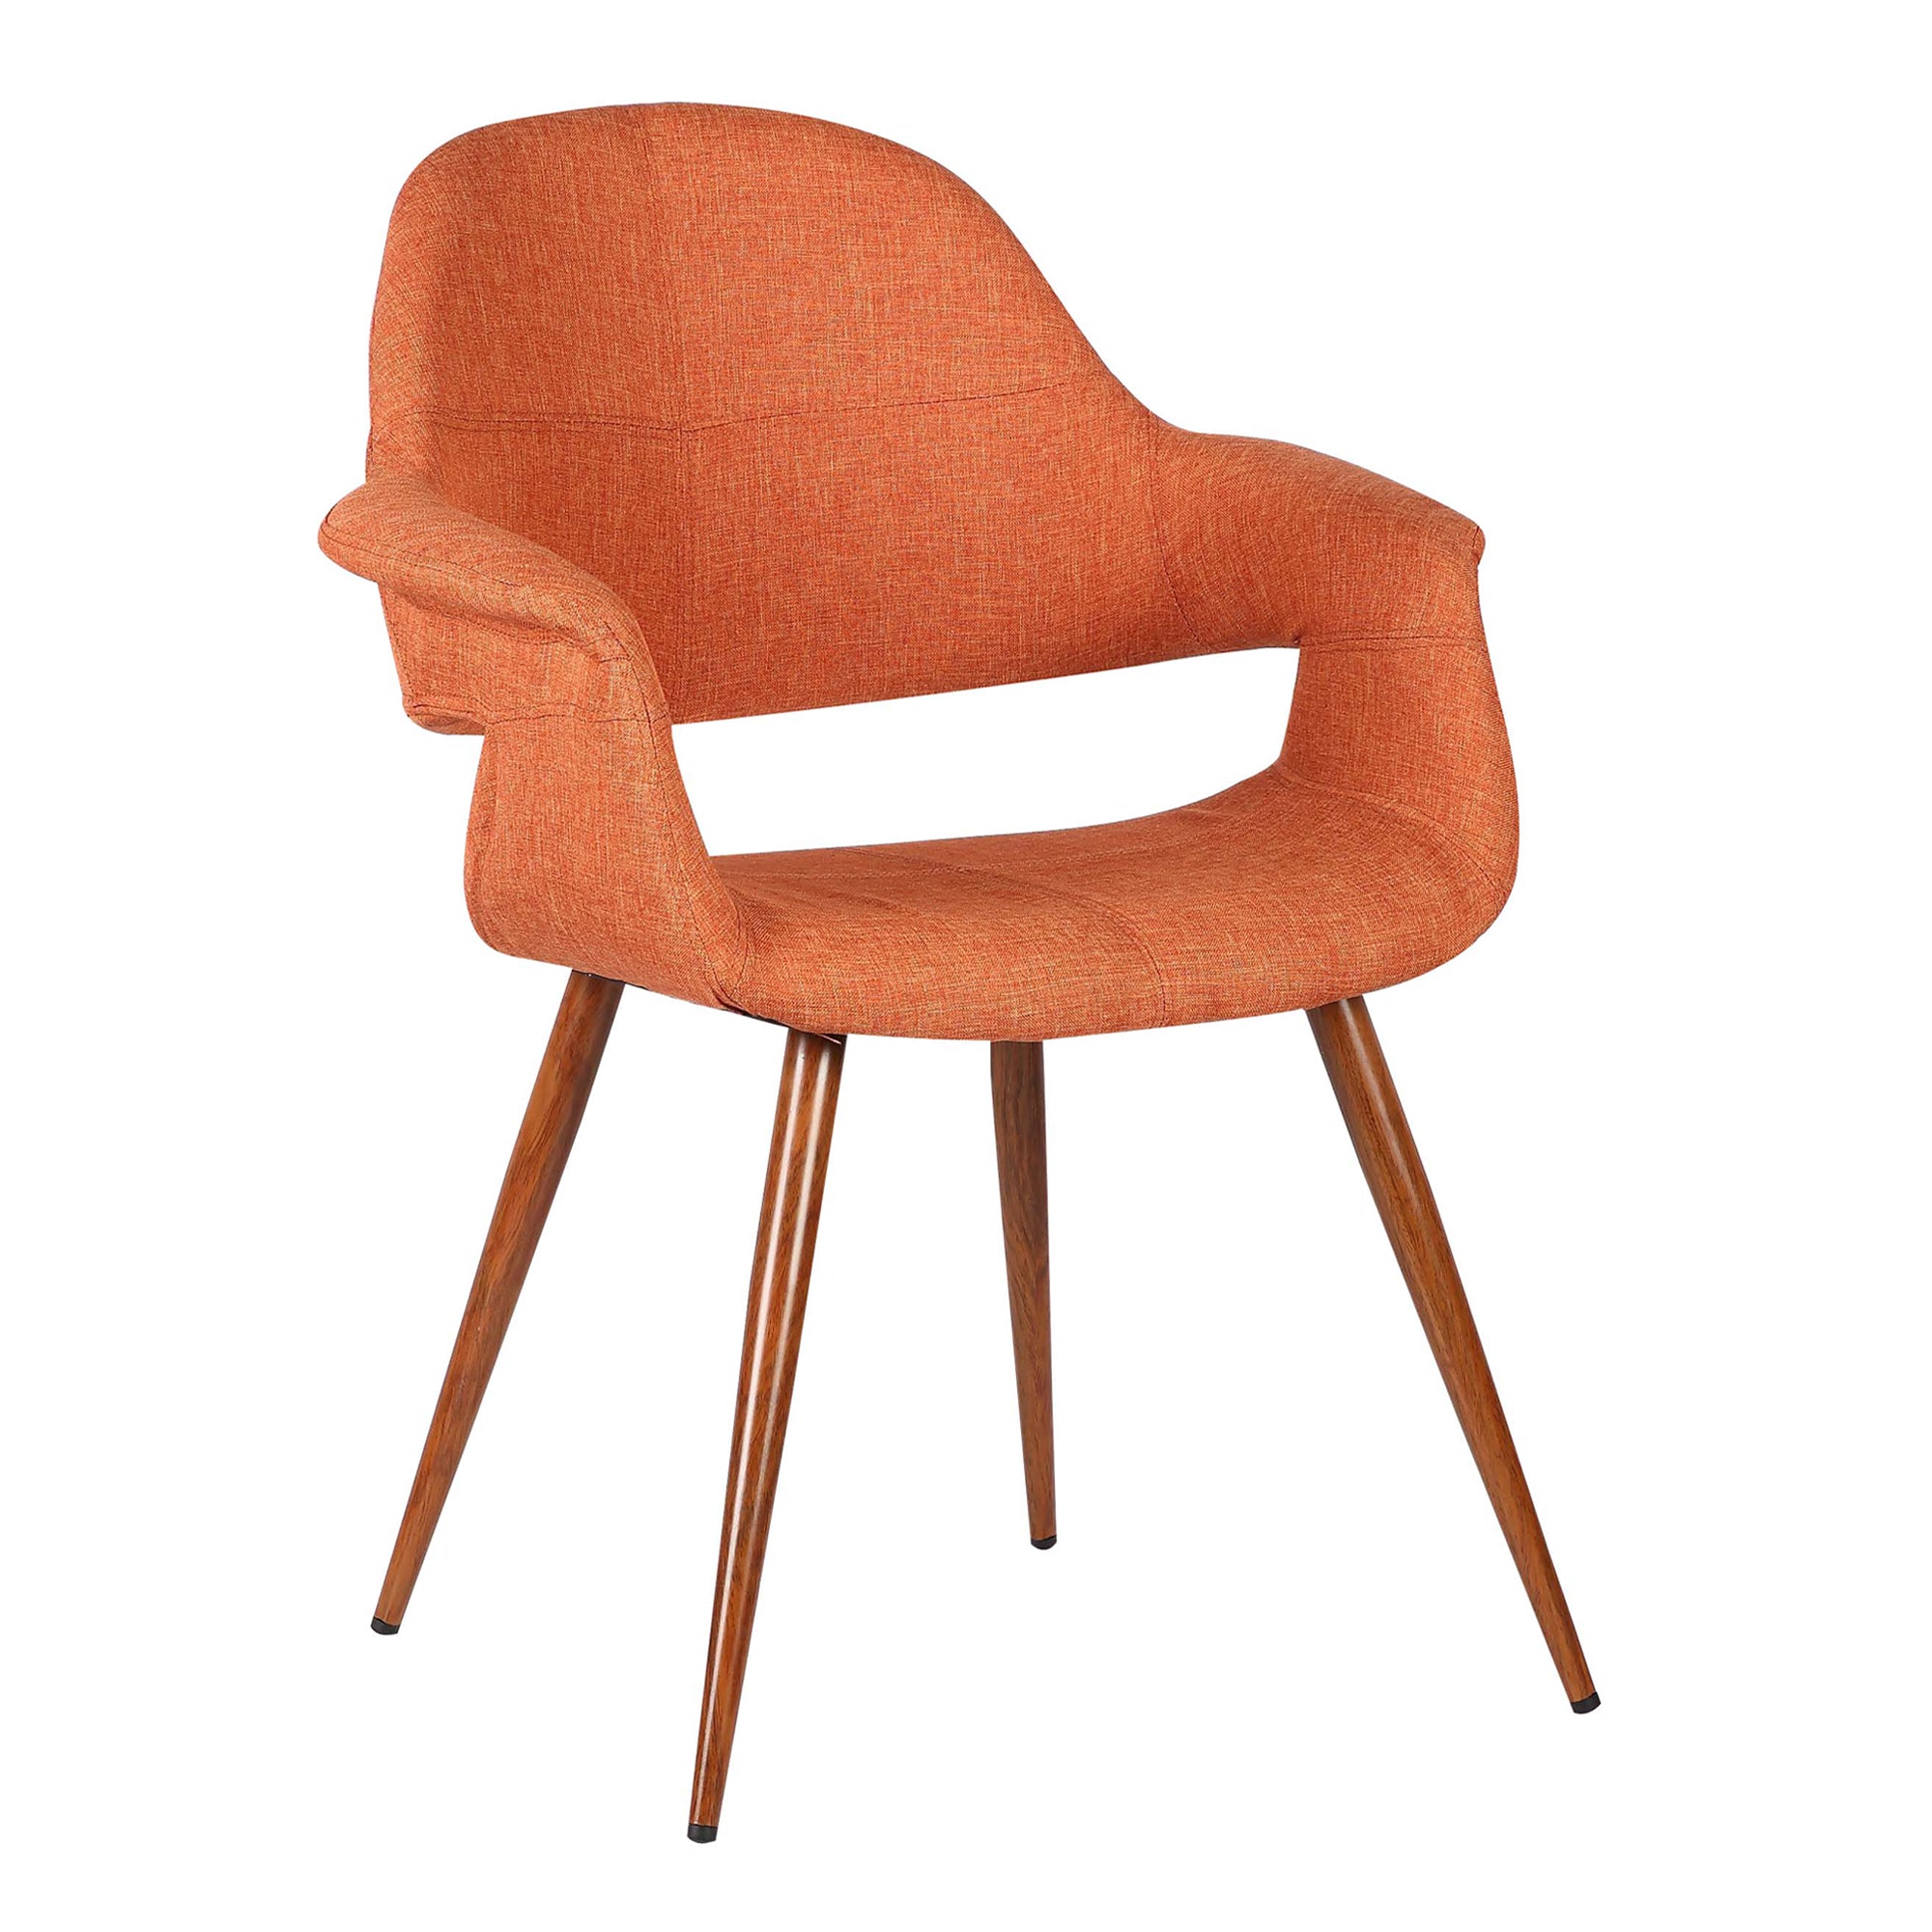 Armen Living Lcphsiwaor Phoebe Mid-century Dining Chair In Walnut Finish And Orange Fabric